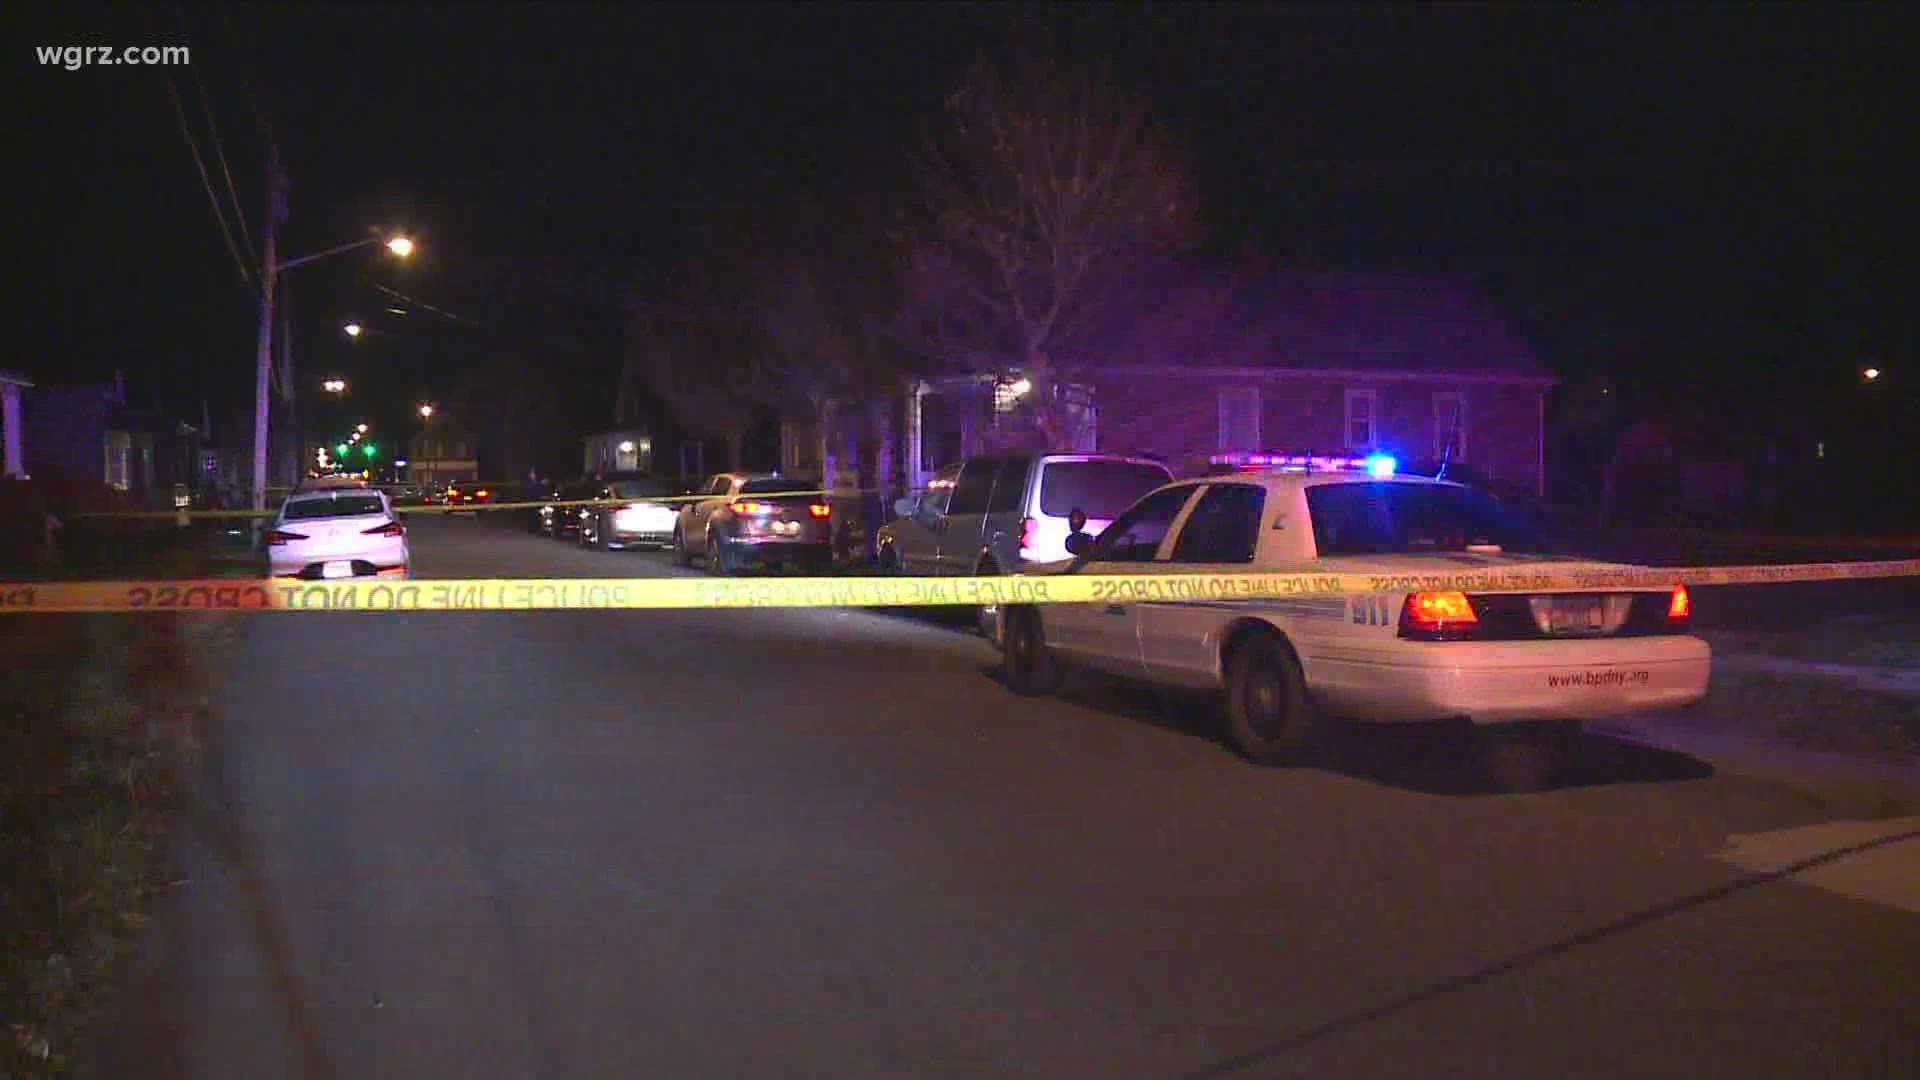 Buffalo police say two women were shot at a house party on Smith Street near William Street around 3 this morning.